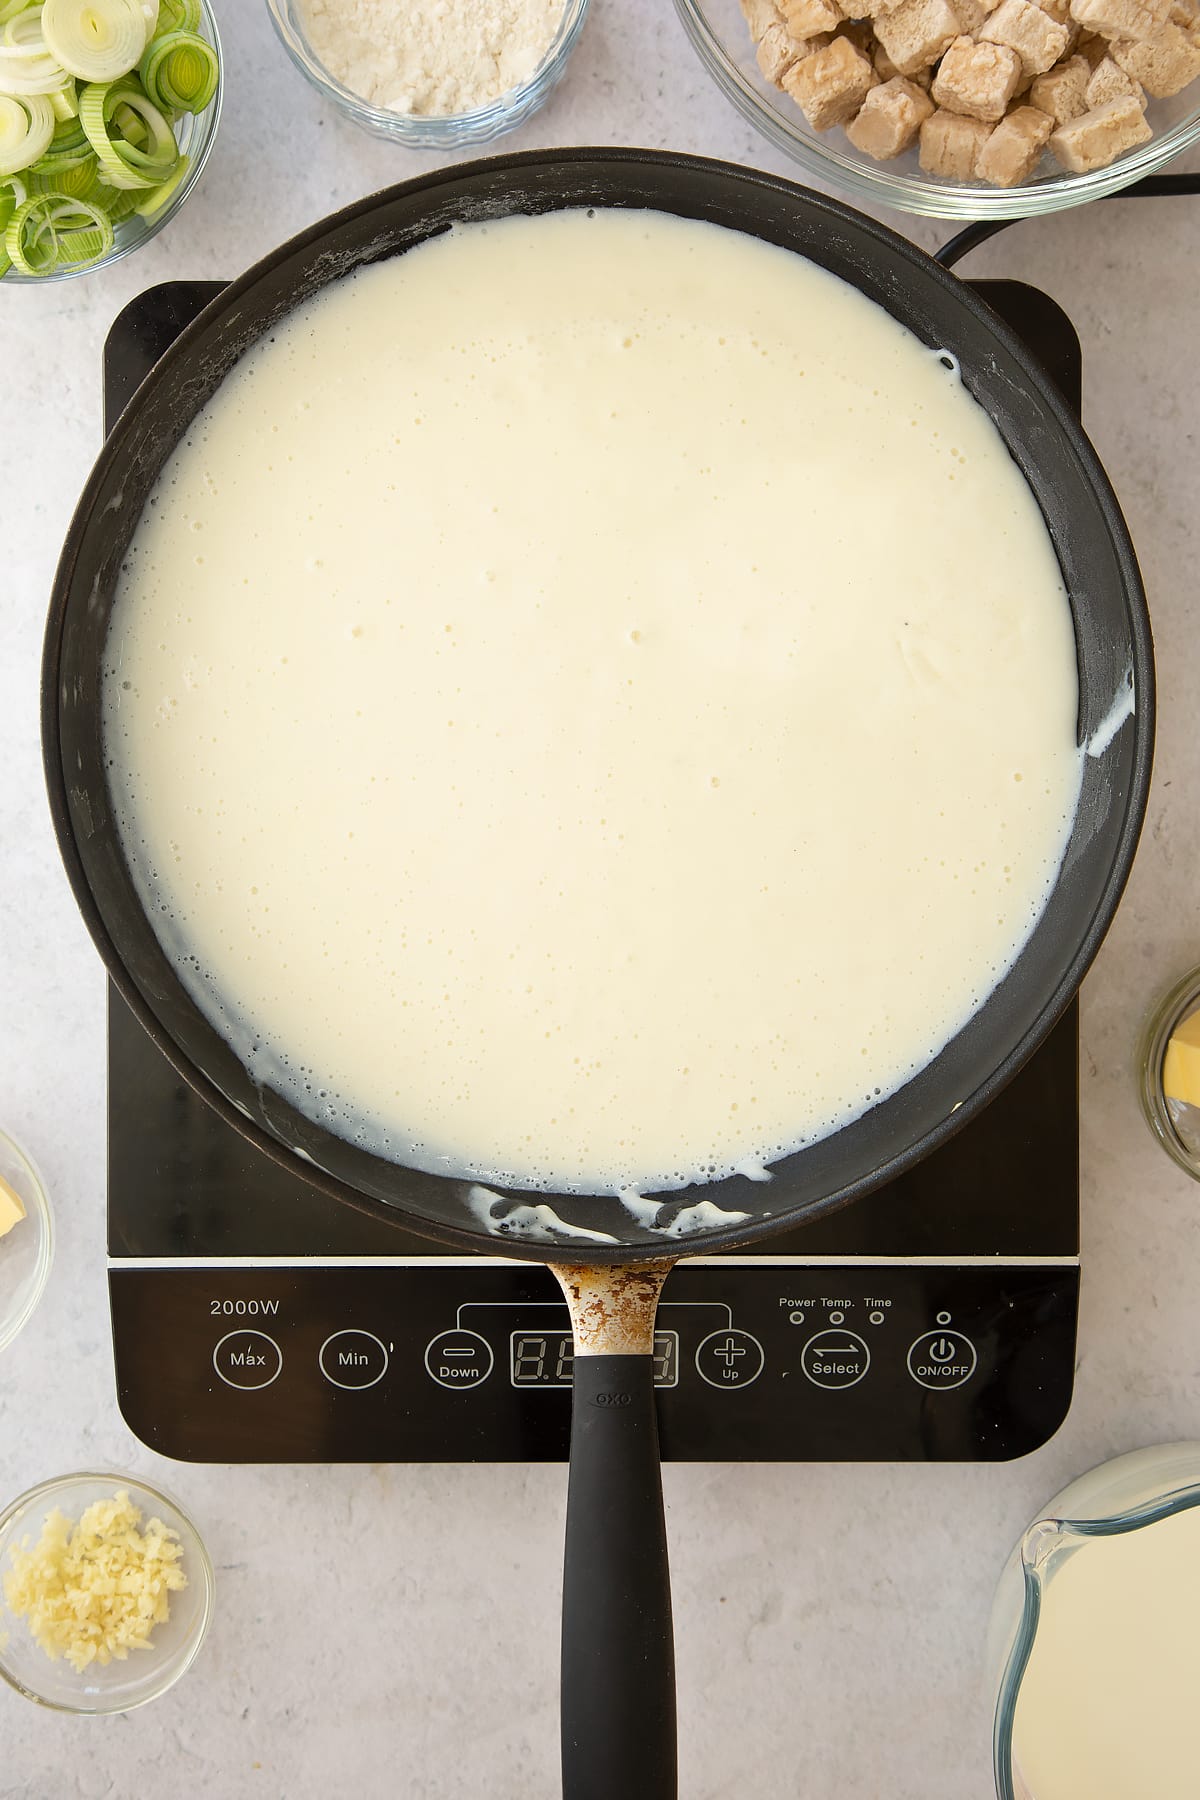 cooked milk and flour mix in a large frying pan on an induction hob.